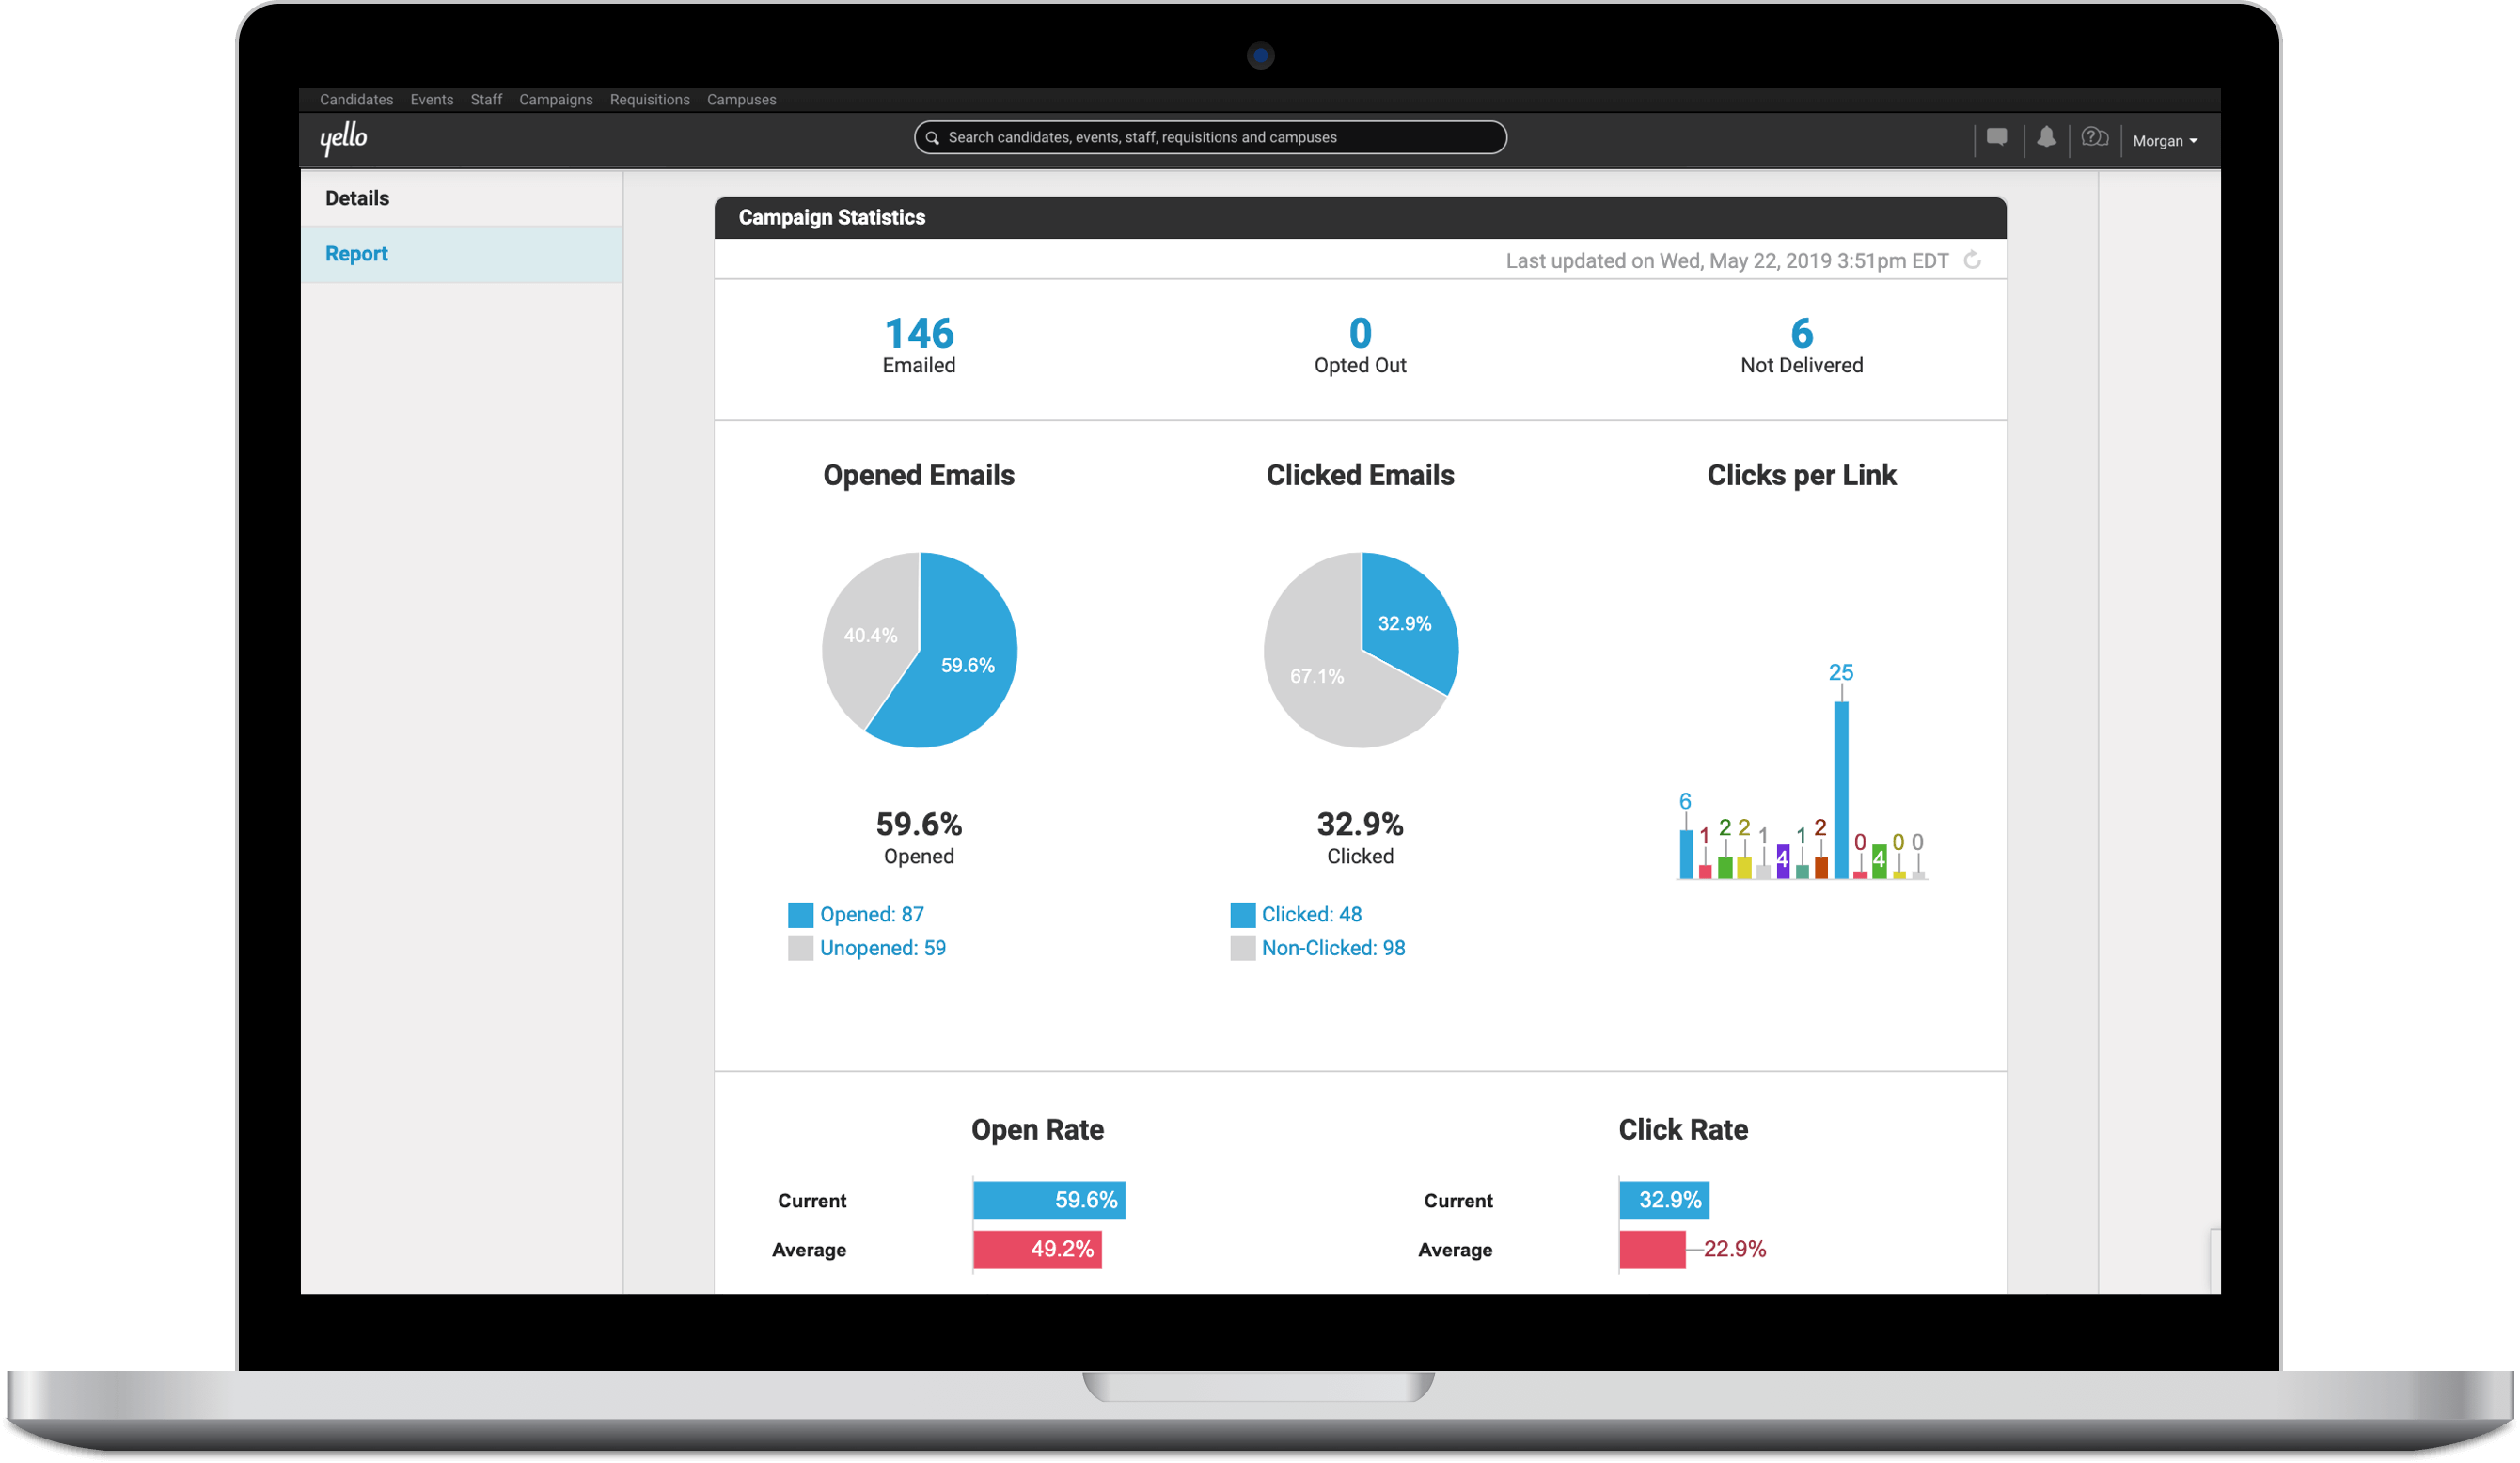 Easily monitor campaign performance and get key engagement insights to improve your strategy in the future.